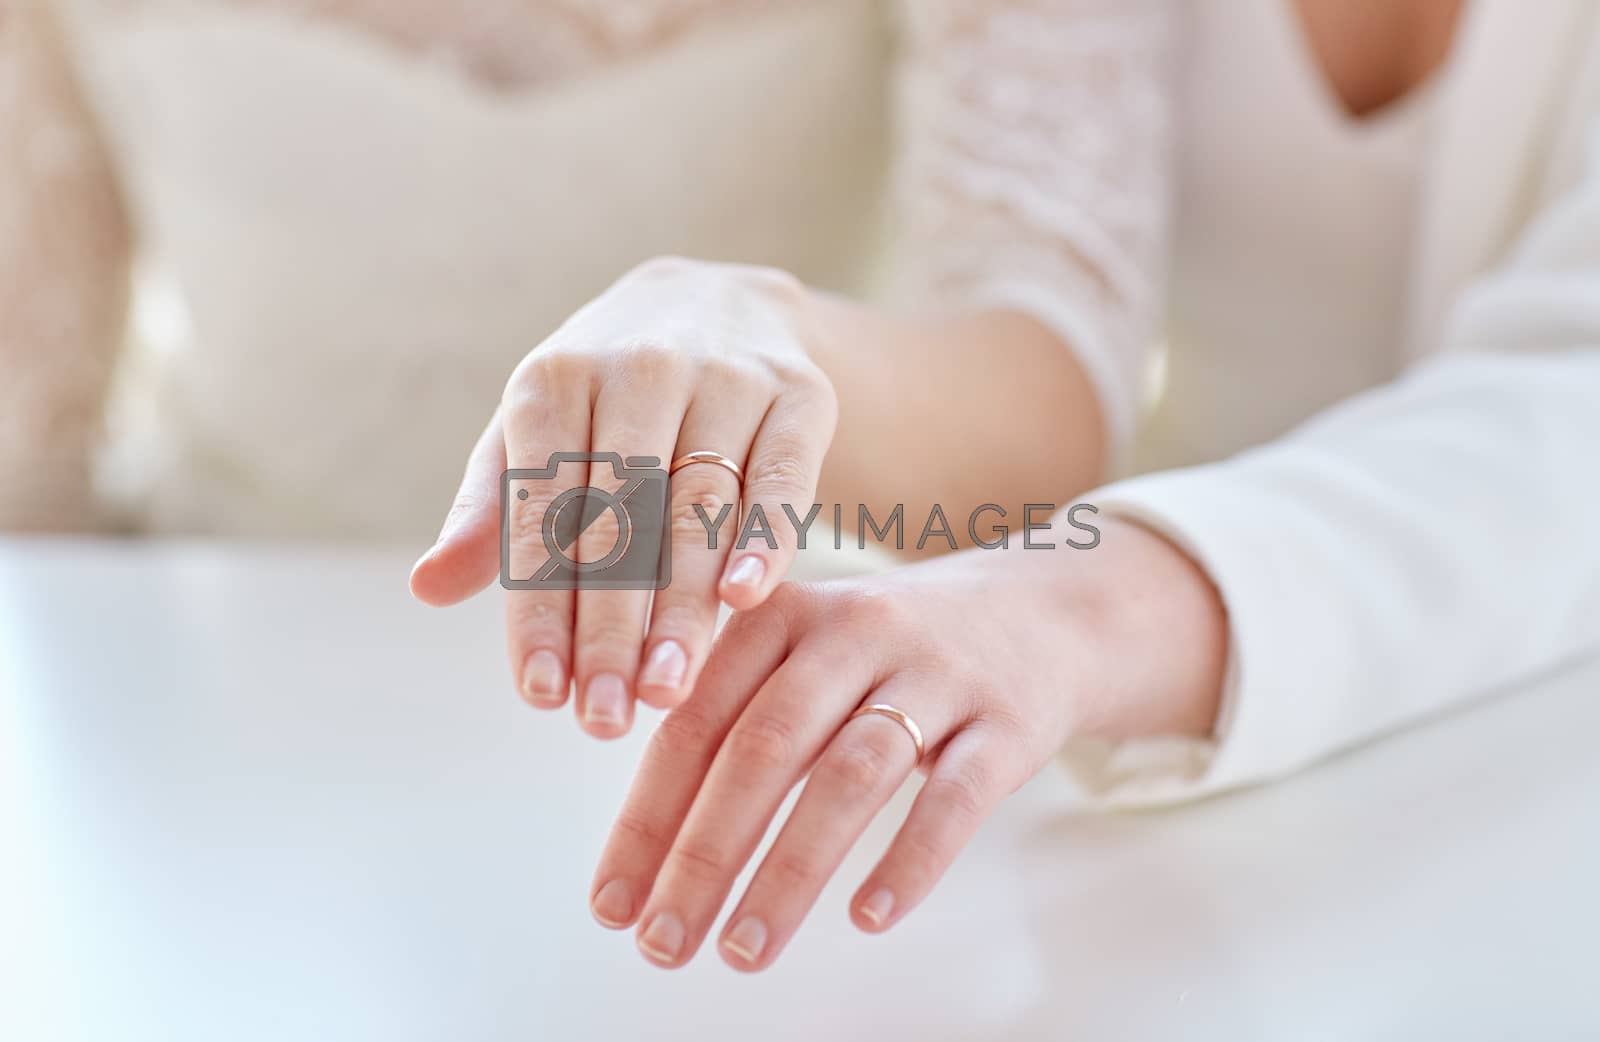 Royalty free image of close up of lesbian couple hands and wedding rings by dolgachov